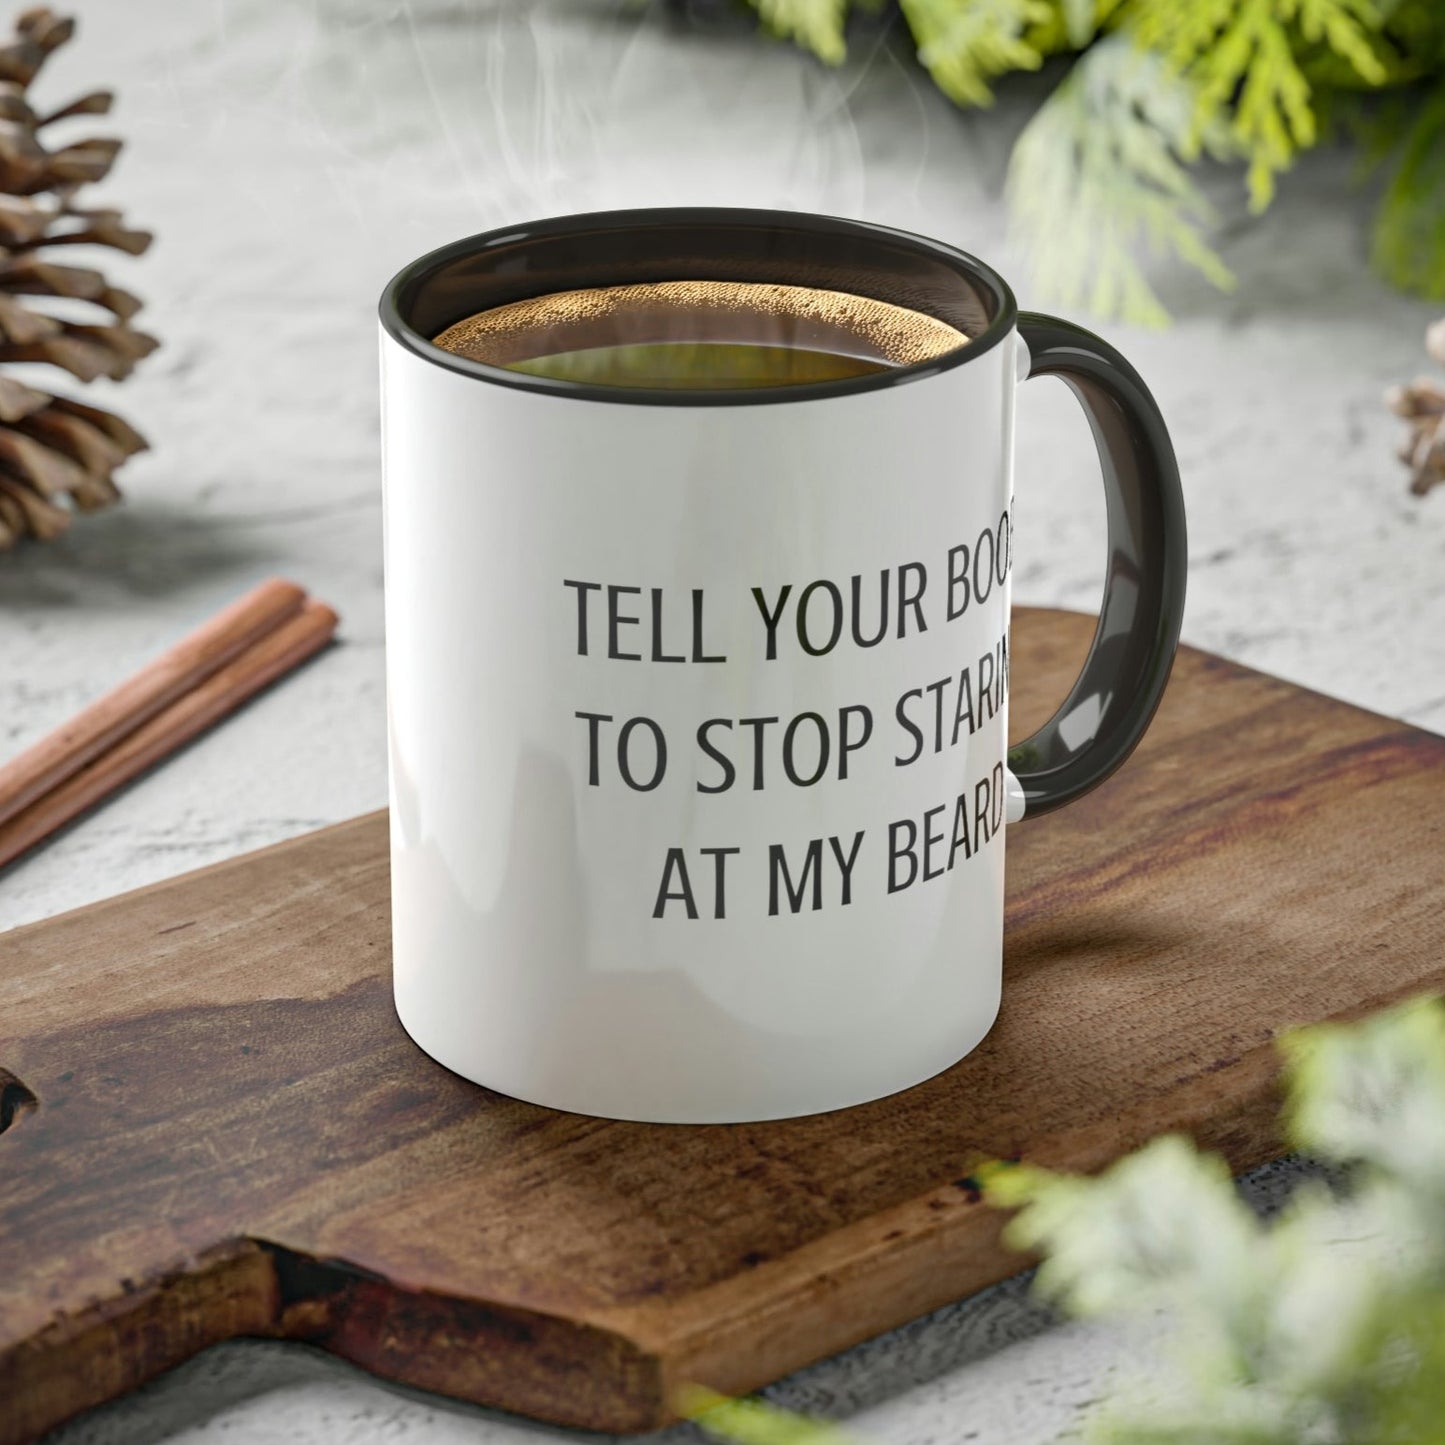 tell-your-boobs-to-stop-staring-at-my-beard-glossy-mug-11-oz-coffee-funny-mockup-on-a-cutting-board